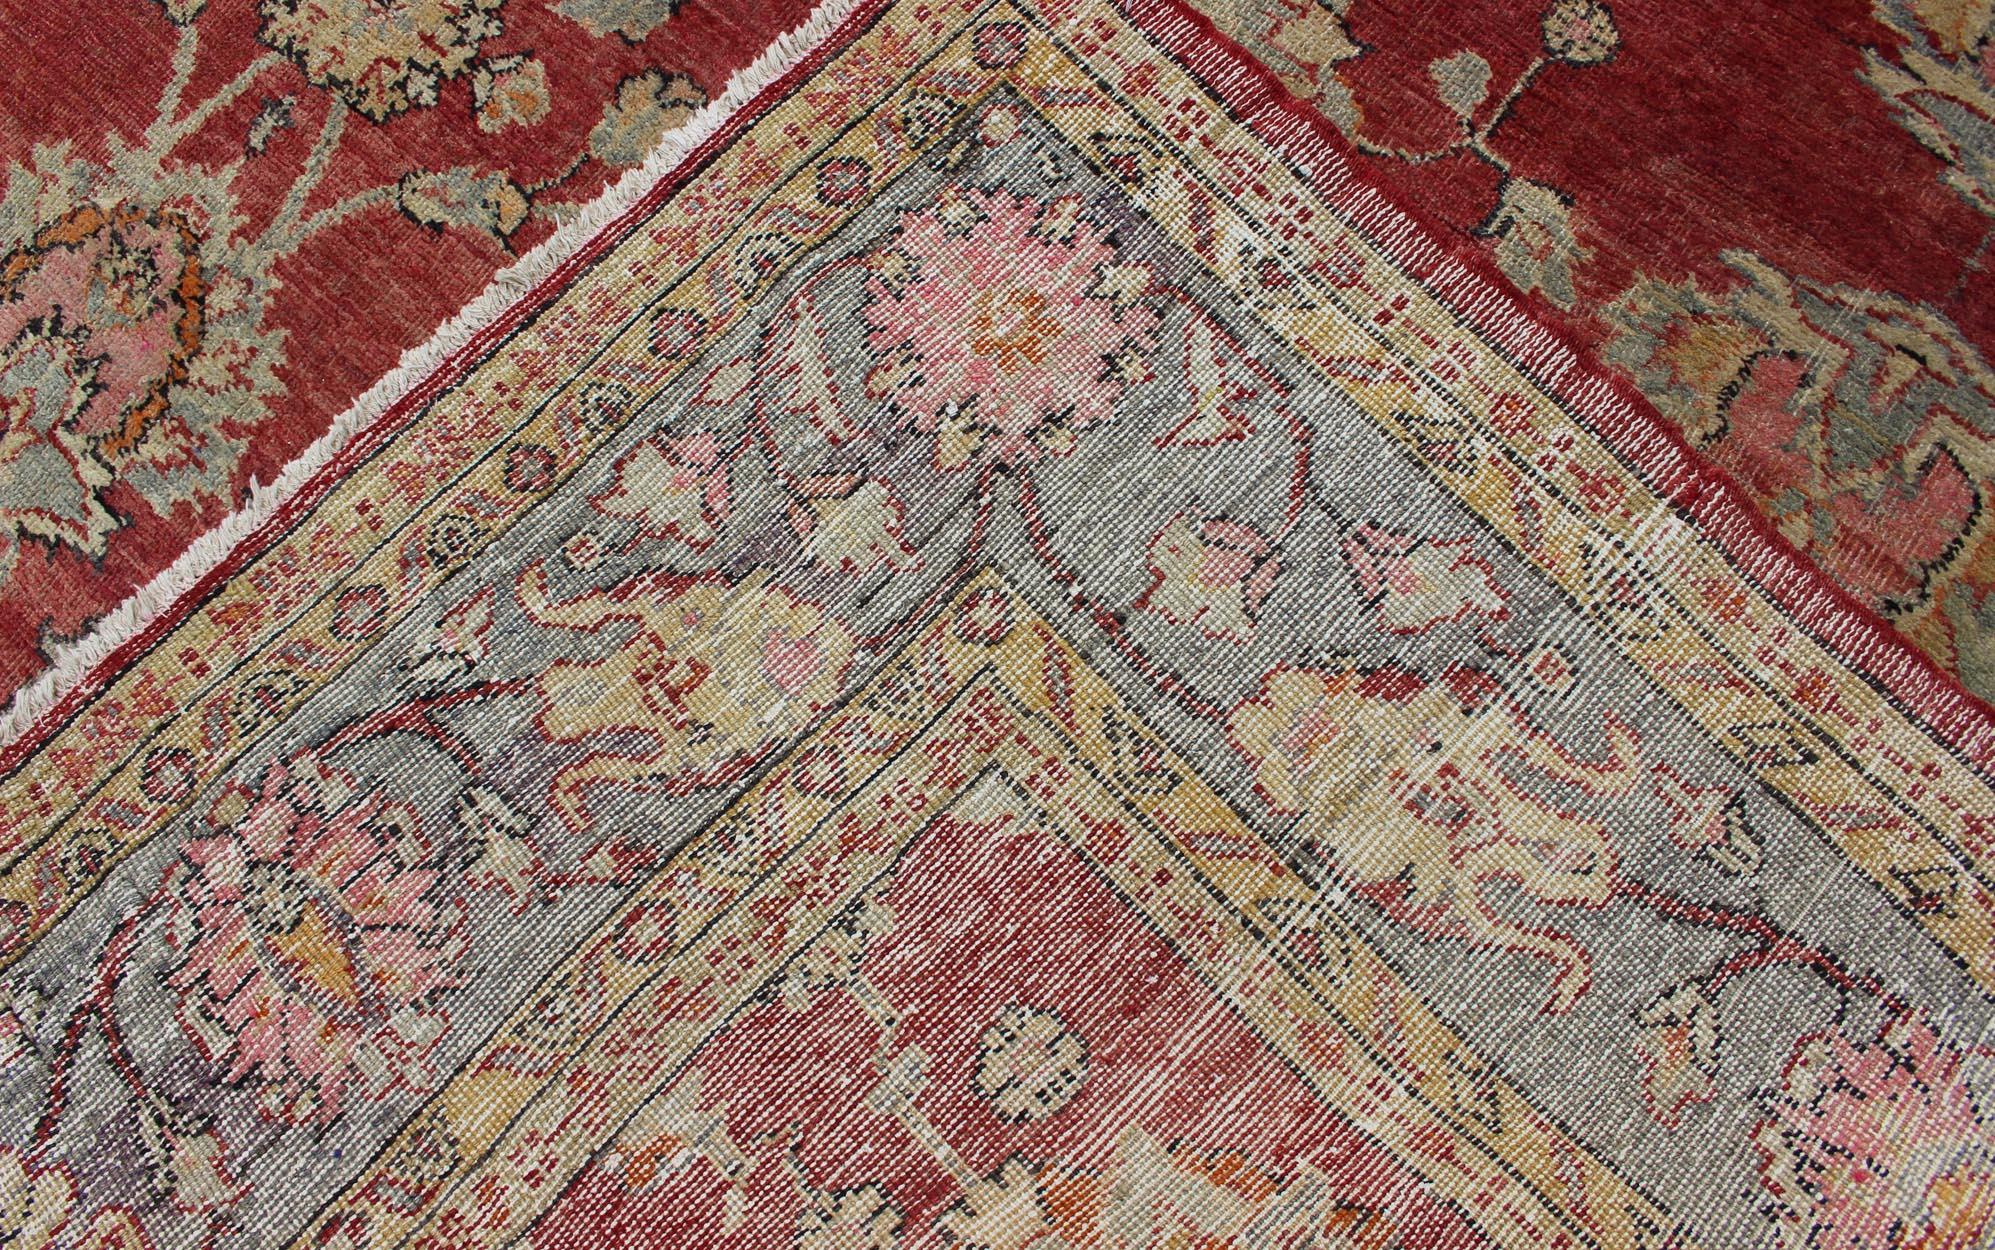 Antique Turkish Oushak Rug in Red, Blue/Gray Border, L. Green, Yellow & Pink For Sale 4